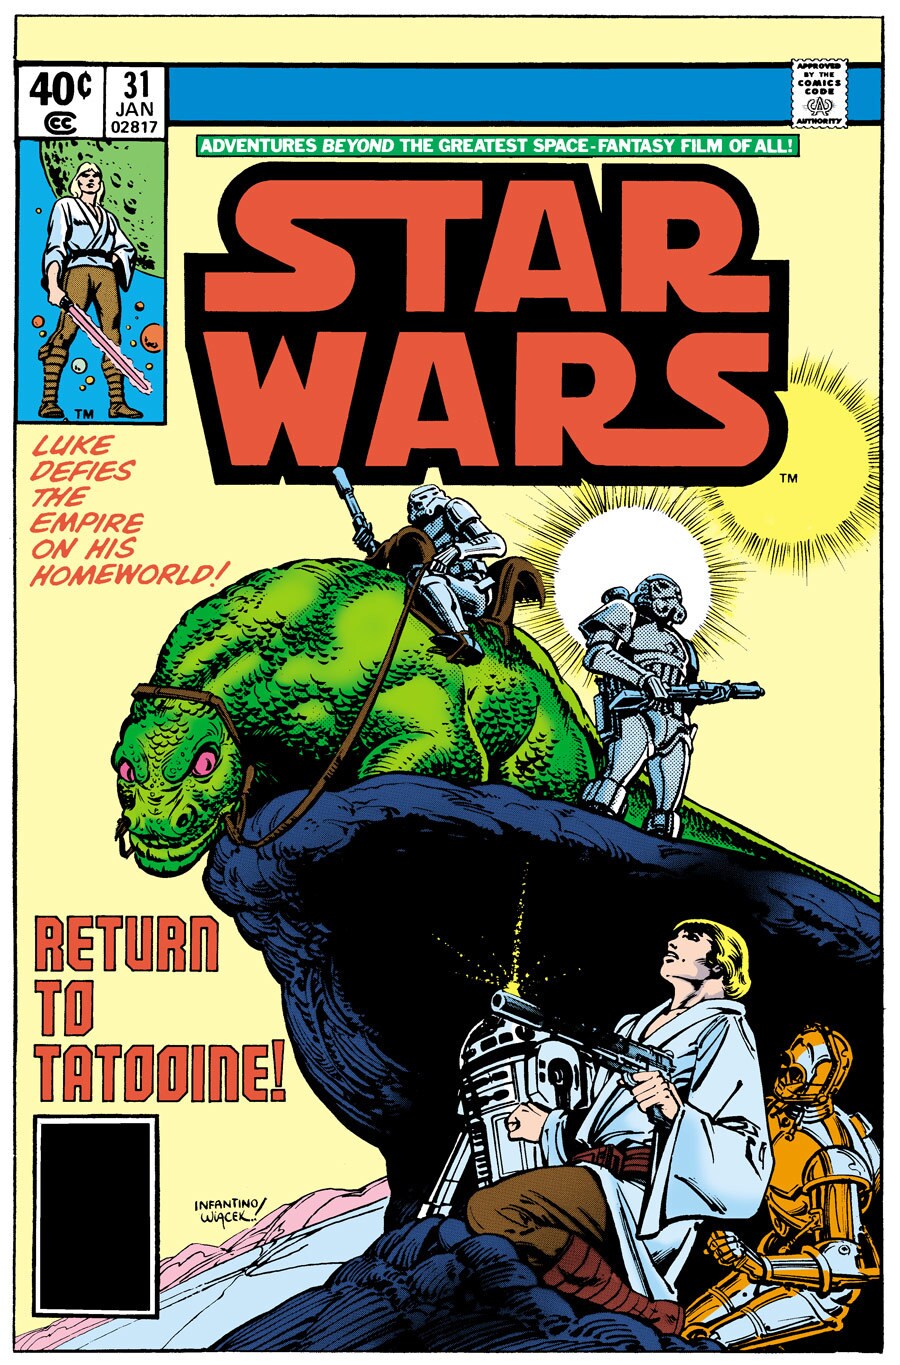 The cover of the Marvel comic book Star Wars: Return to Tatooine shows Luke, R2-D2, and C-3PO hiding from stormtroopers with a dewback.